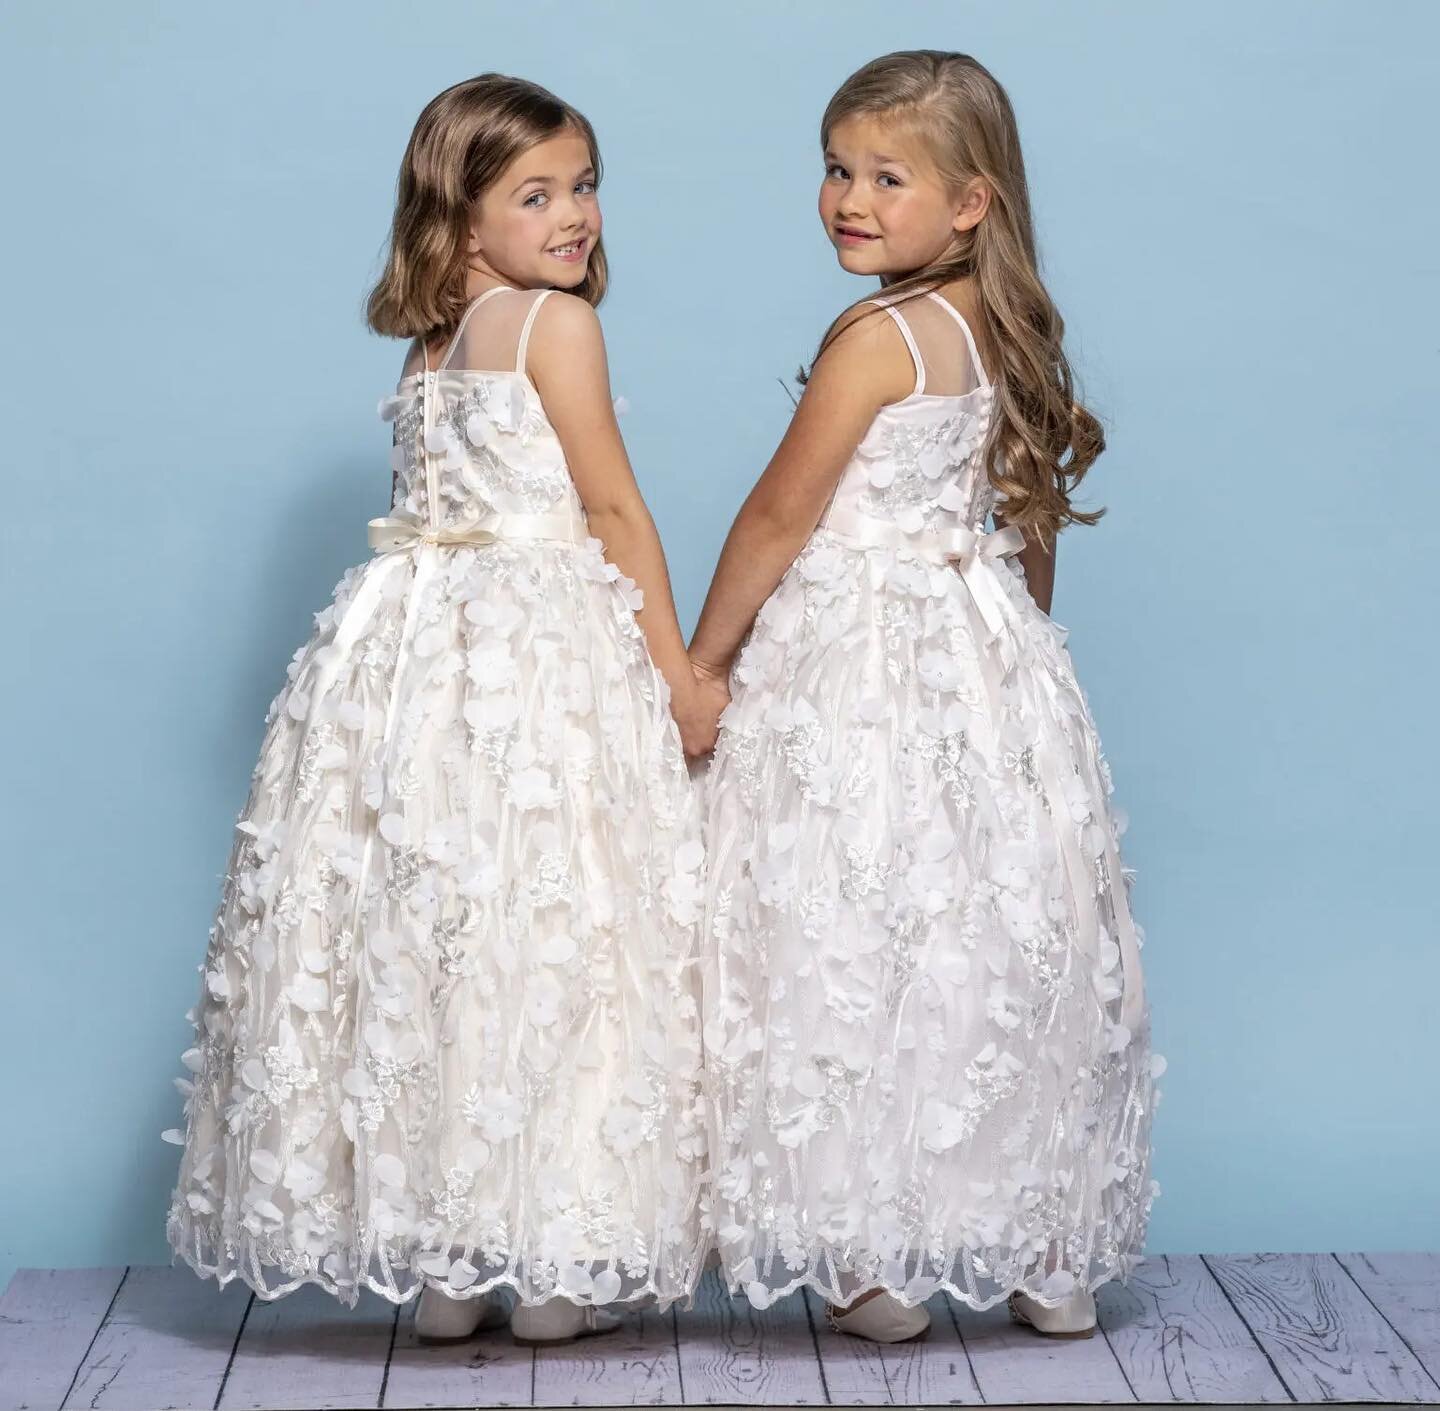 Did you know we carry flower girl dresses/event dresses for little girls?

Our designer Rose Buds has several unique gown styles to pick from, we currently have 4 select styles in store. They also make matching dresses for dolls too! So cute! 💜

We 